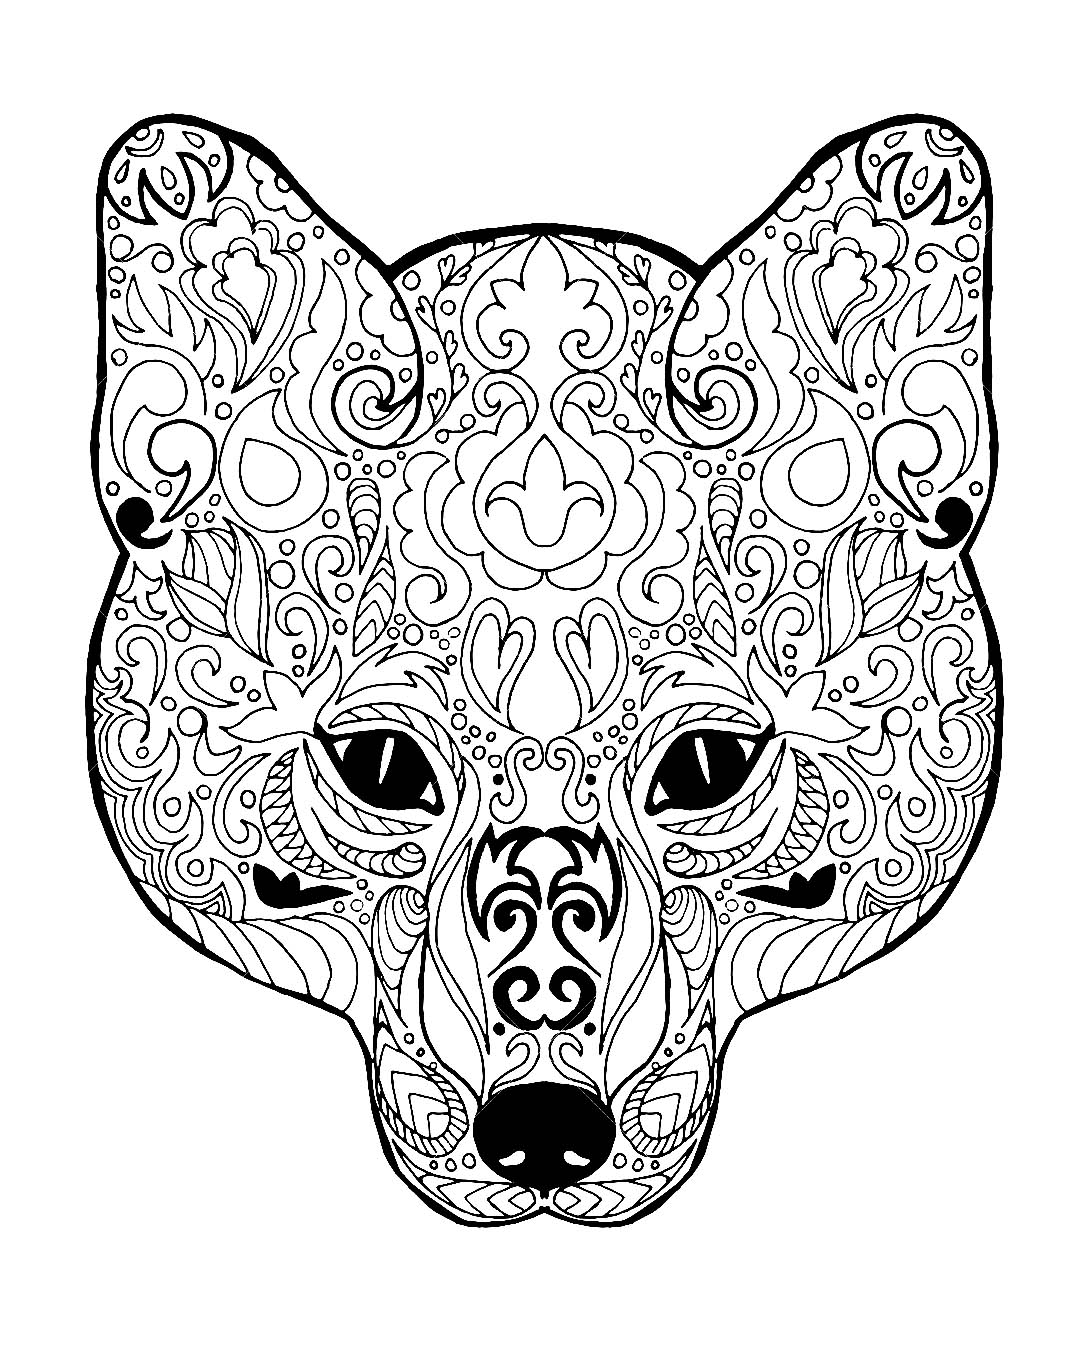  Fox  head with patterns Foxes  Adult  Coloring  Pages 